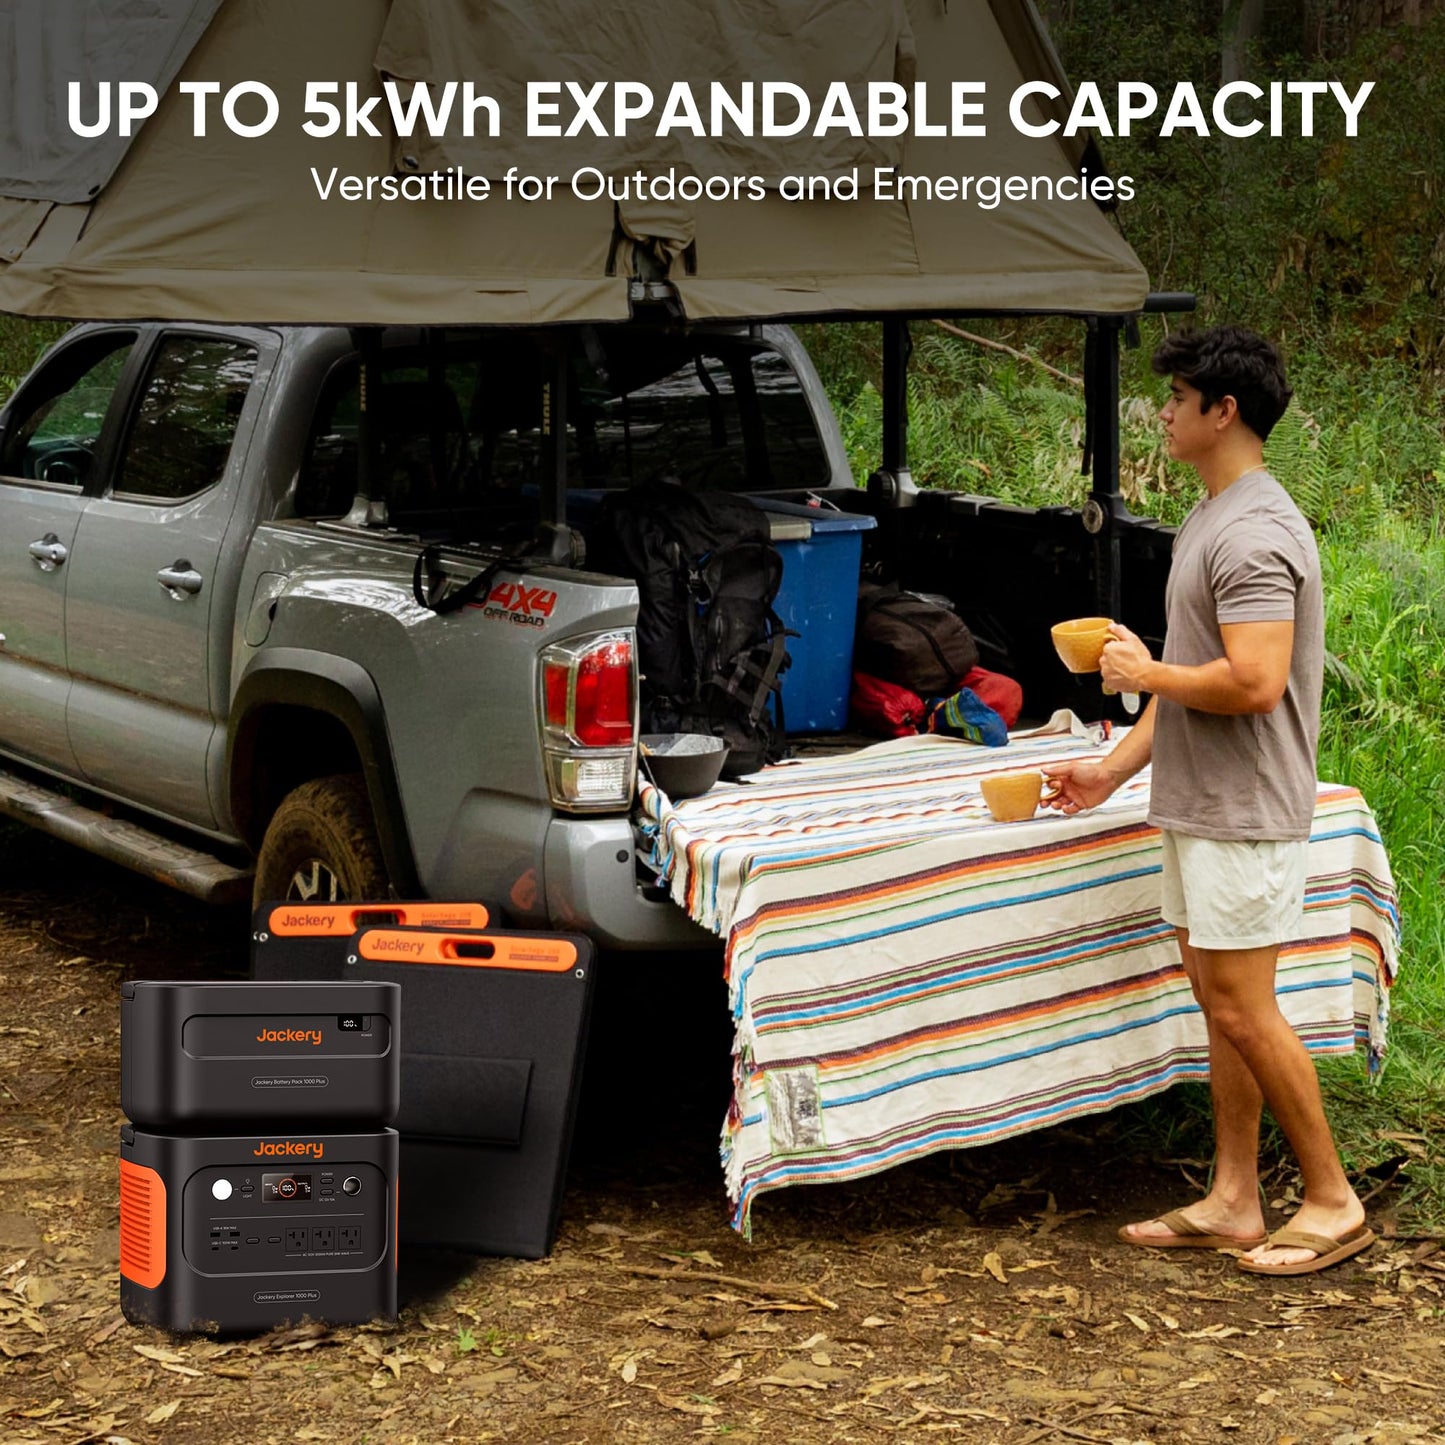 Jackery Explorer 1000 Plus Kit, Explorer 1000 Plus Portable Power Station +1X PackPlus E1000 Plus Expandable Battery, 2528Wh LiFePO4 Battery with 2000W Output for Outdoor RV Camping and Home Emergency